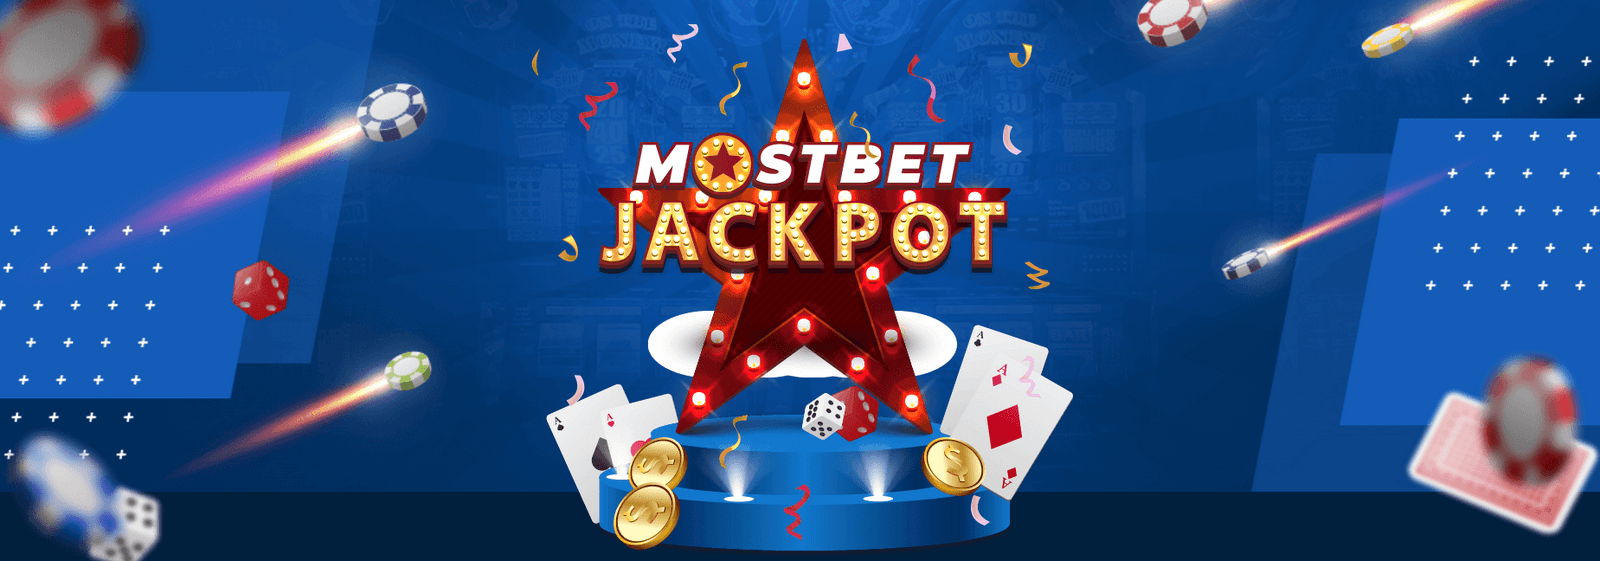 Best Make Mostbet Betting Company in Turkey You Will Read This Year